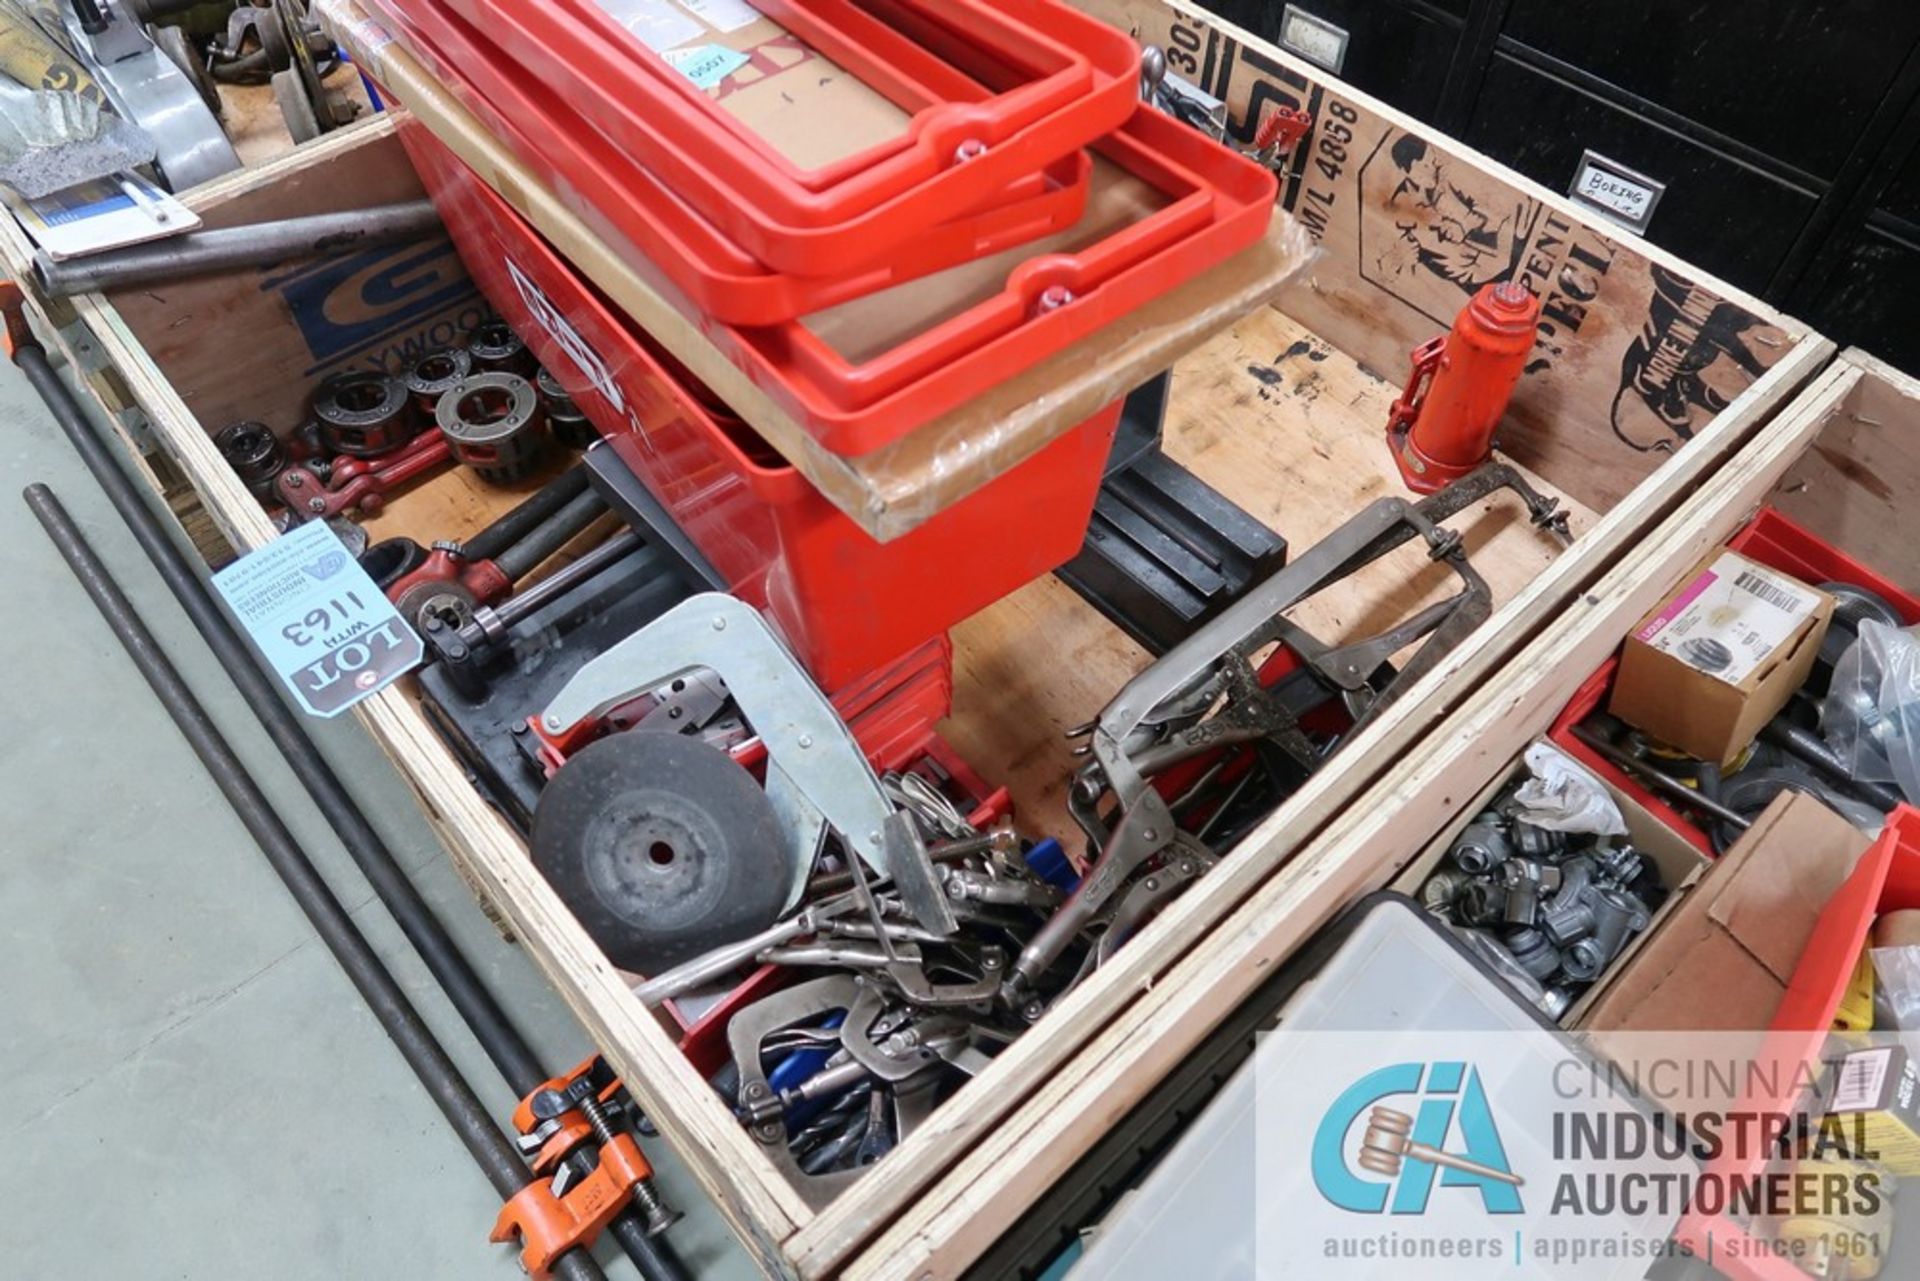 CRATES MISCELLANEOUS SHOP SUPPORT EQUIPMENT - Image 3 of 5